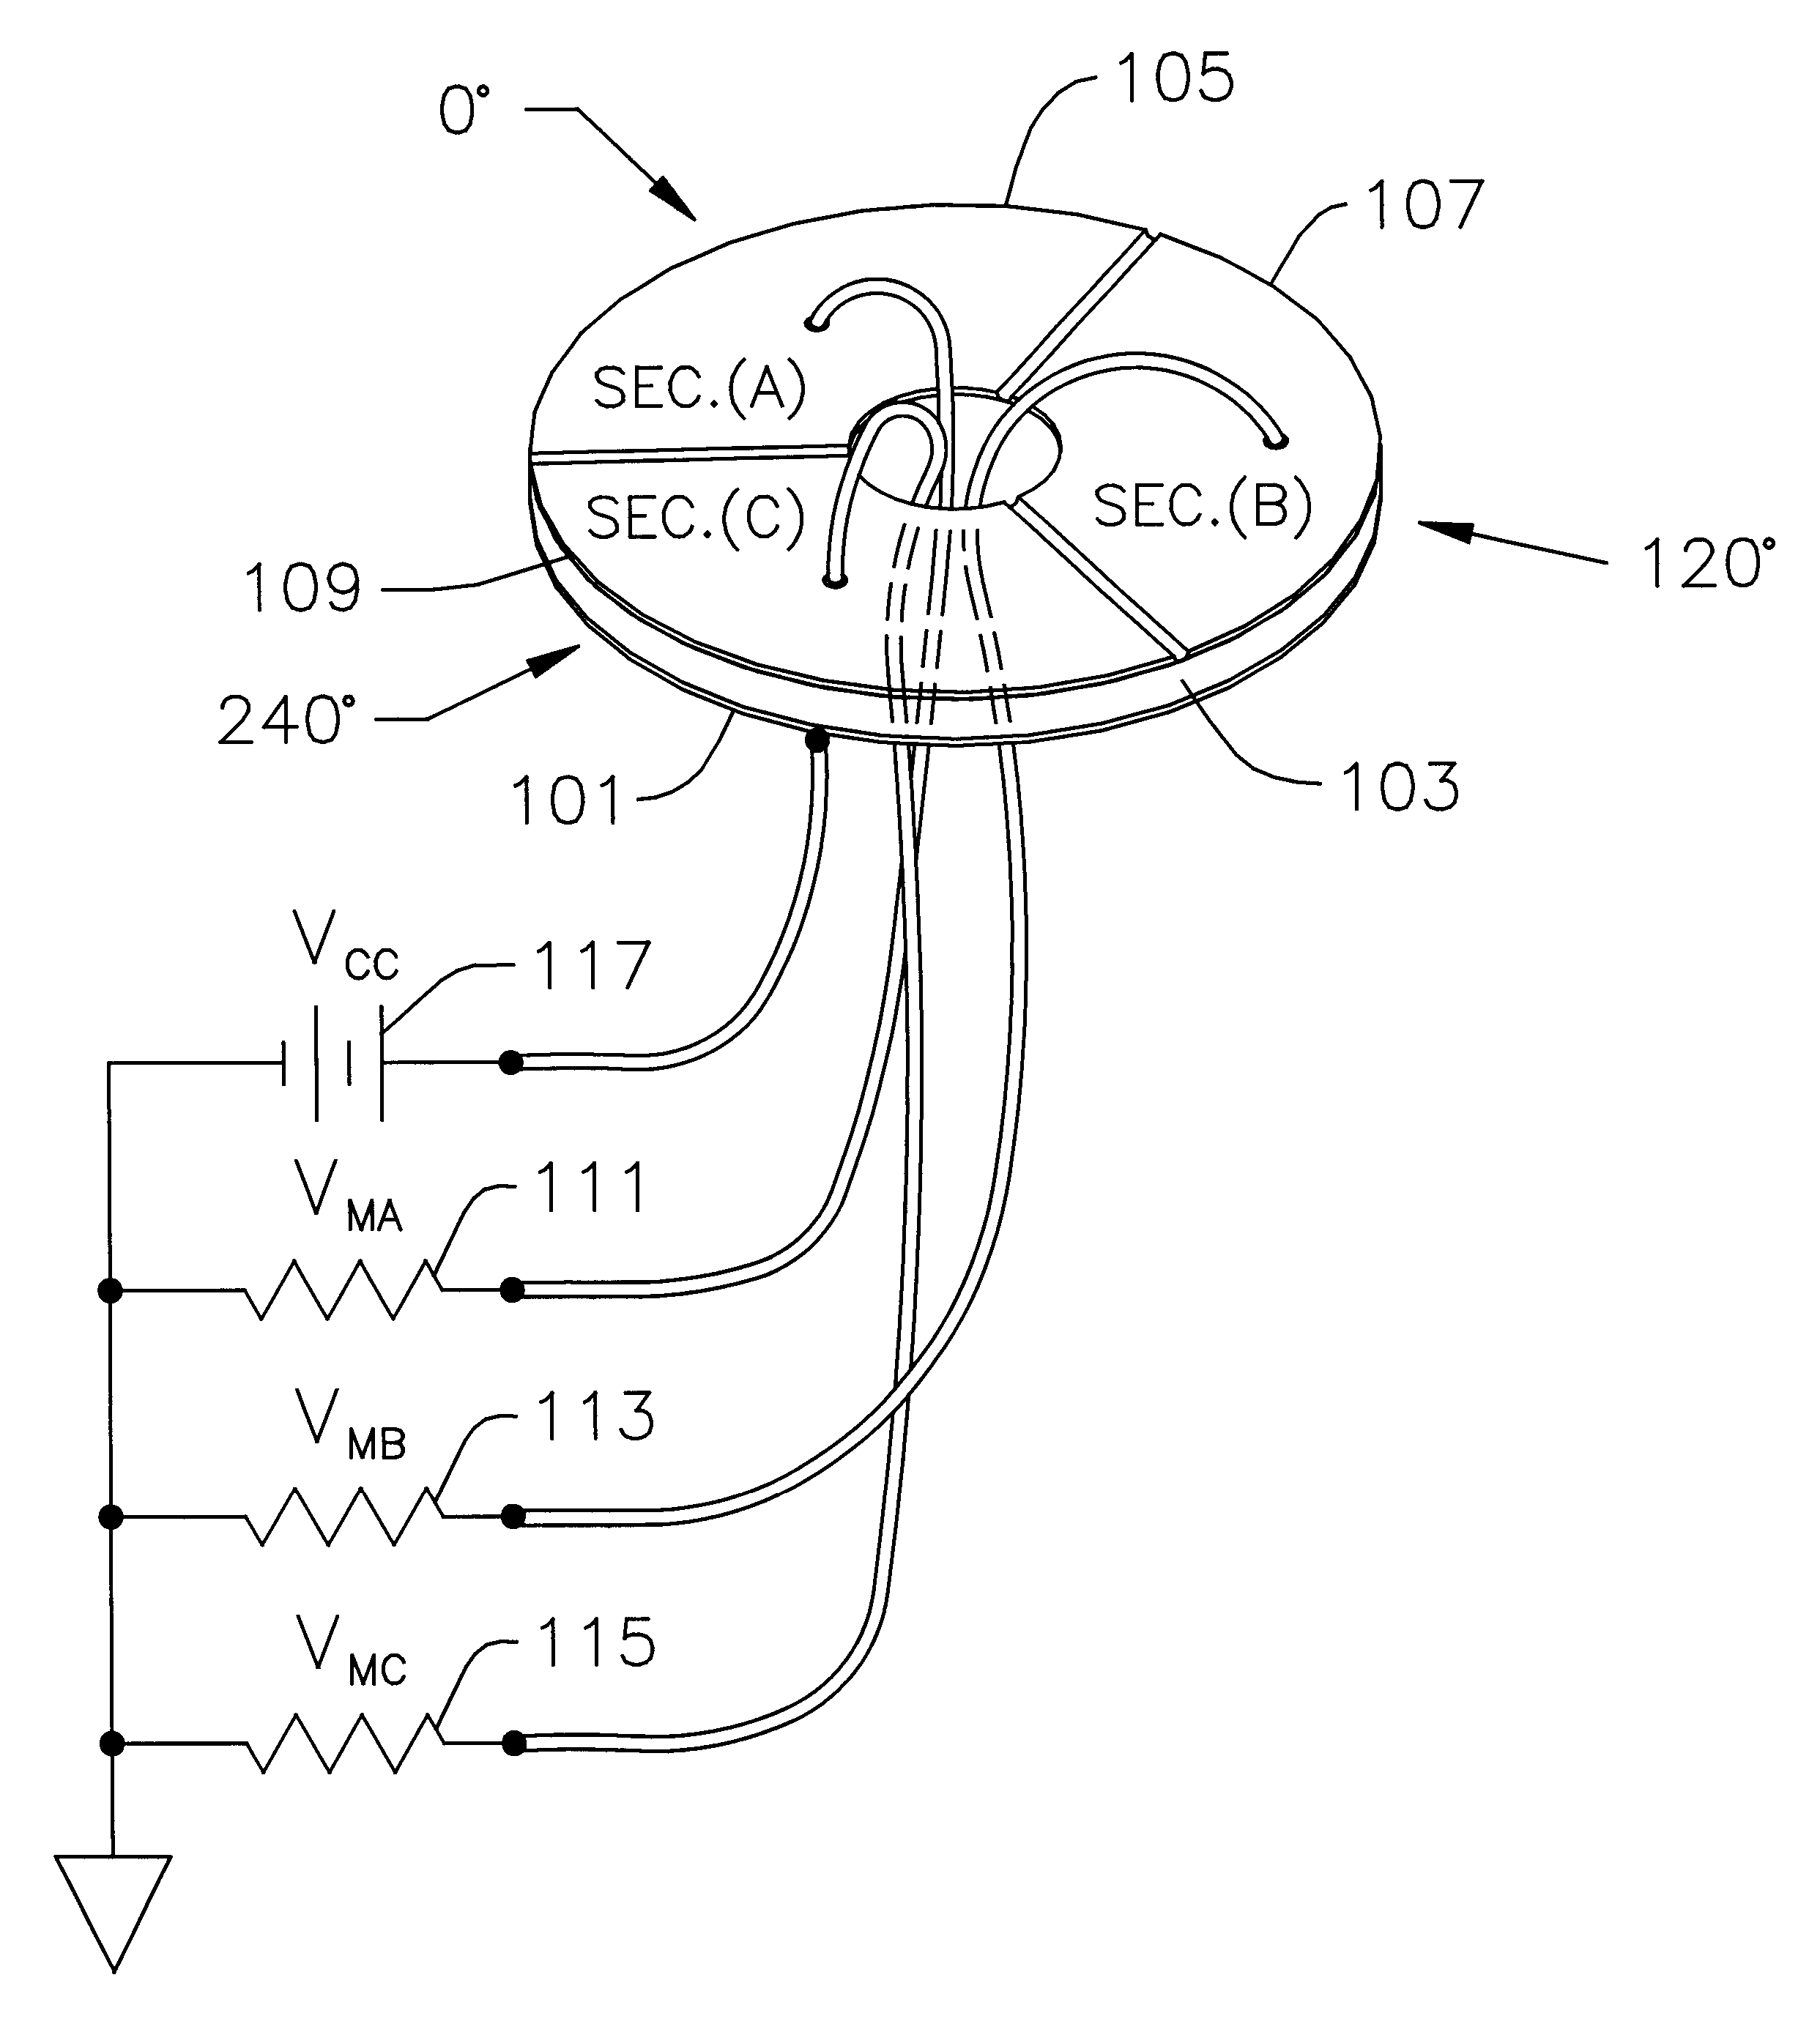 Method and apparatus for sensing and measuring plural physical properties, including temperature